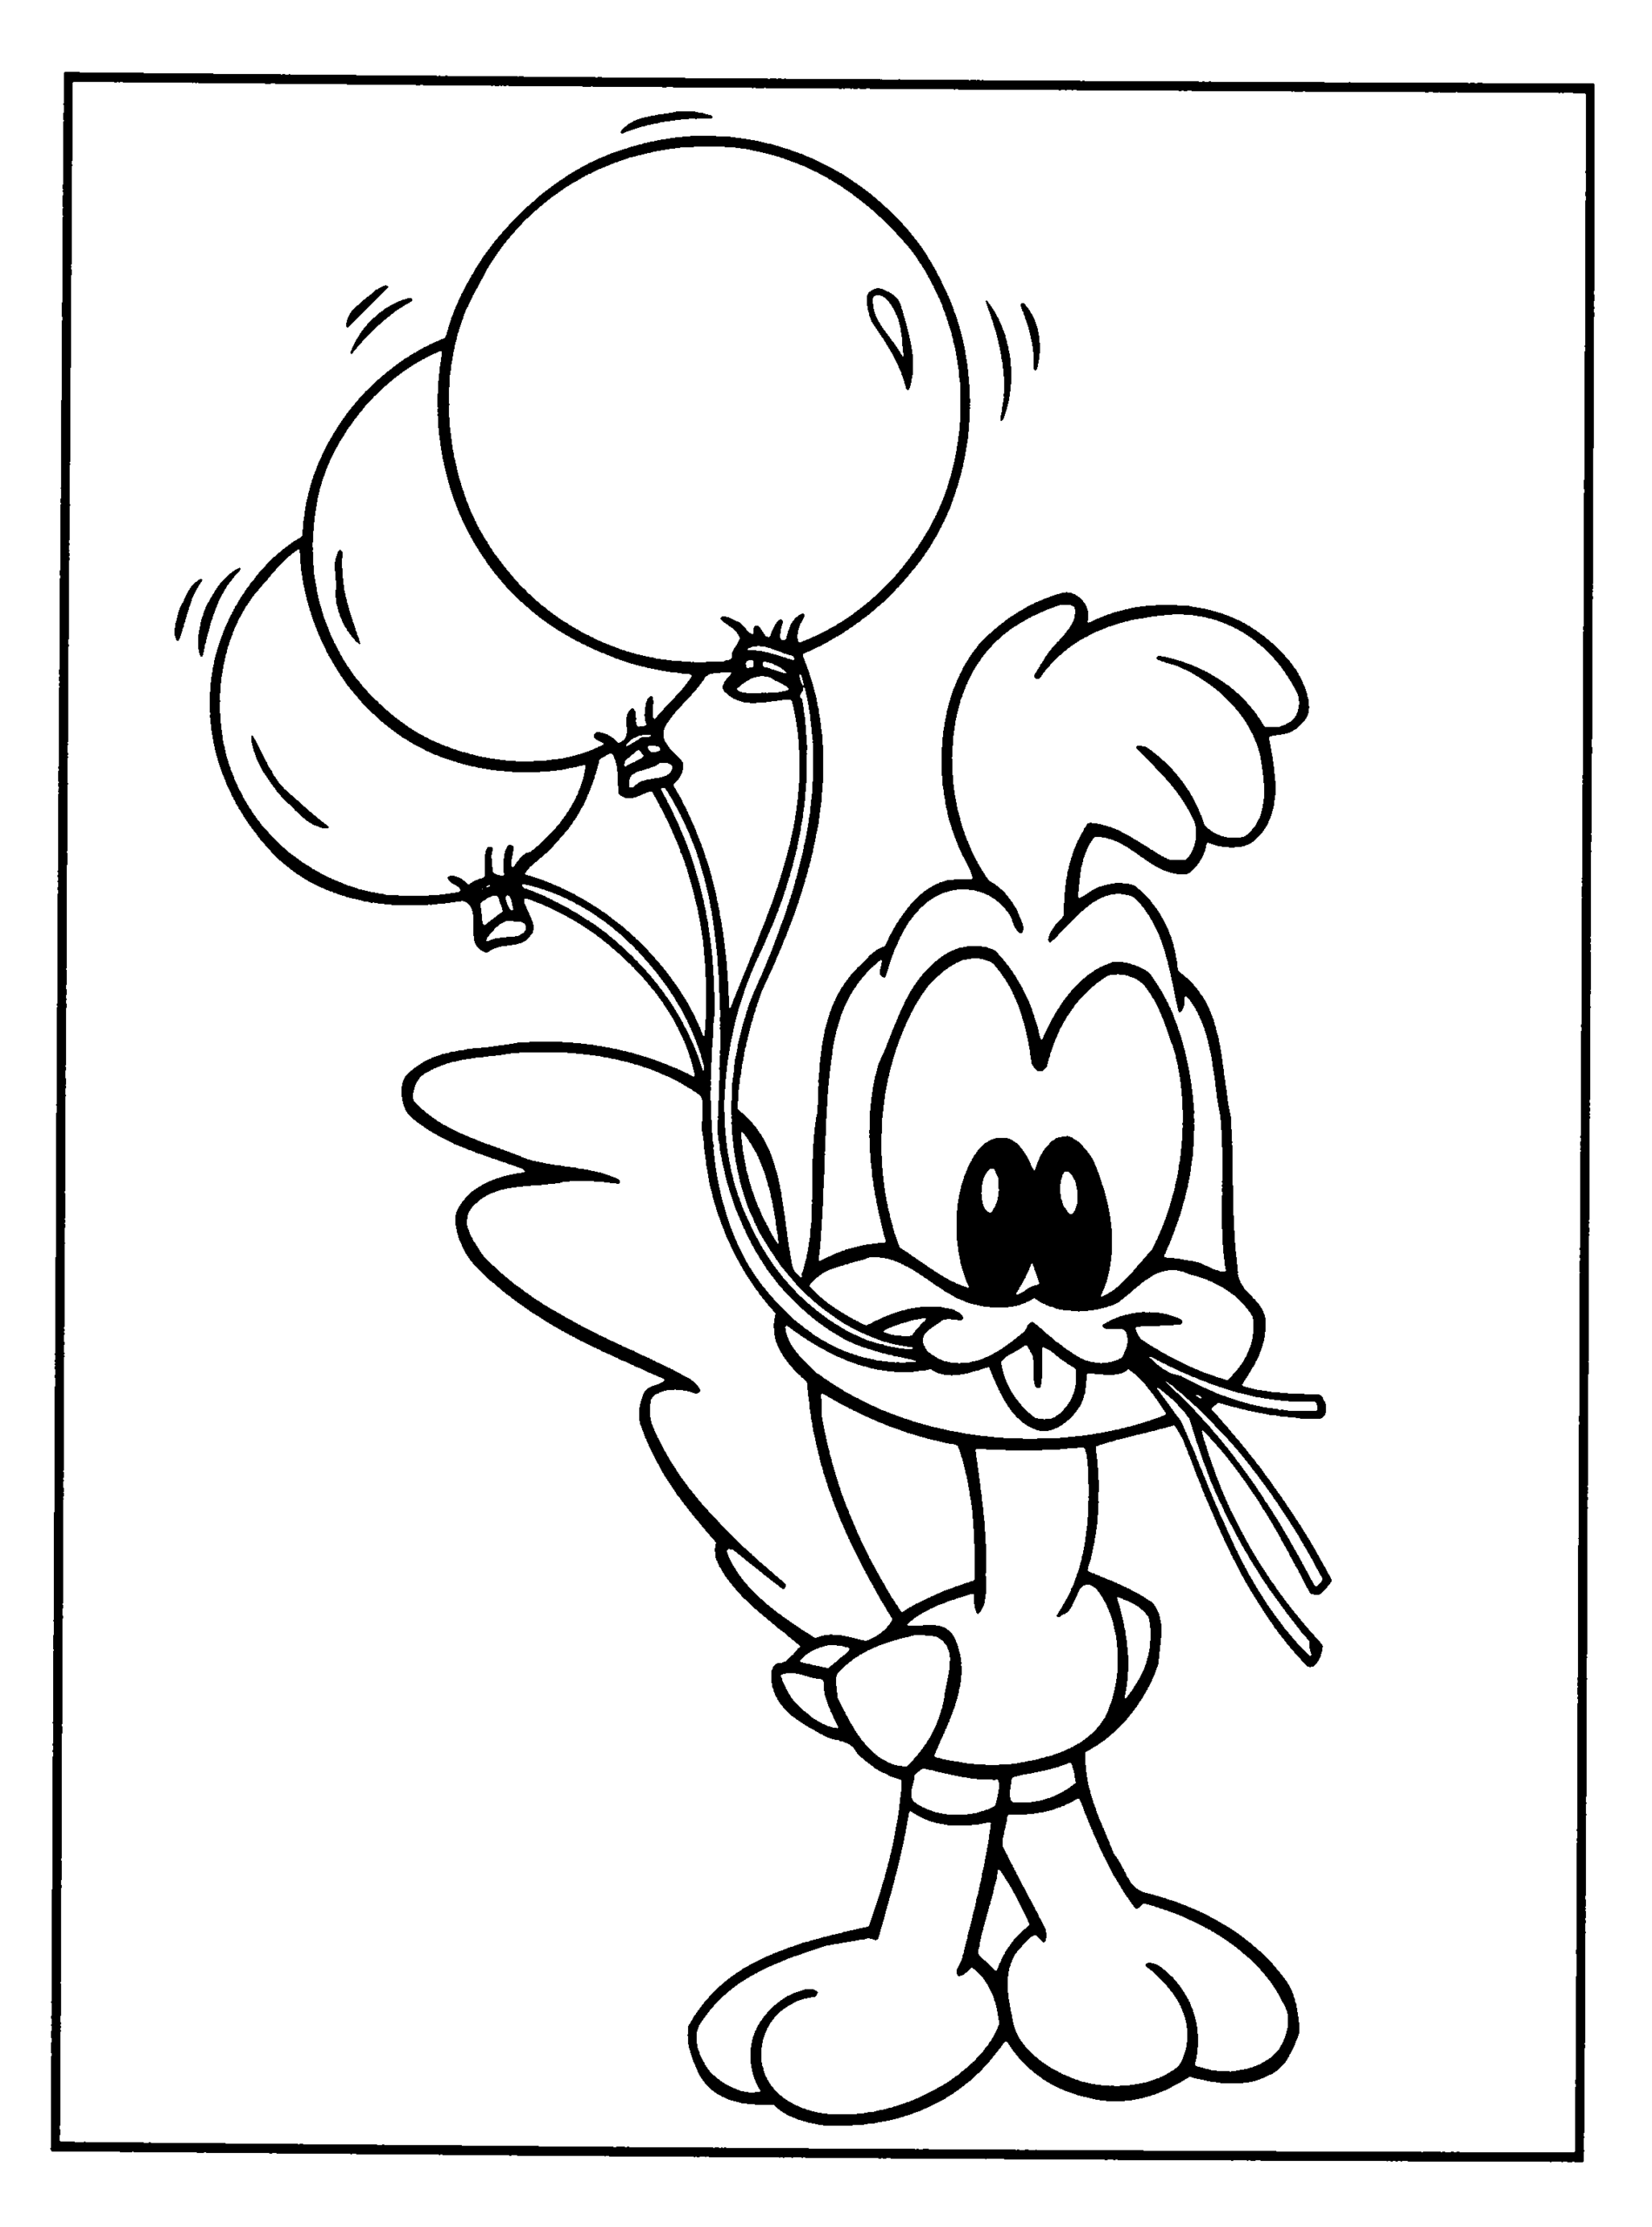 Looney Tunes Coloring Pages TV Film looney tunes 7 Printable 2020 04596 Coloring4free